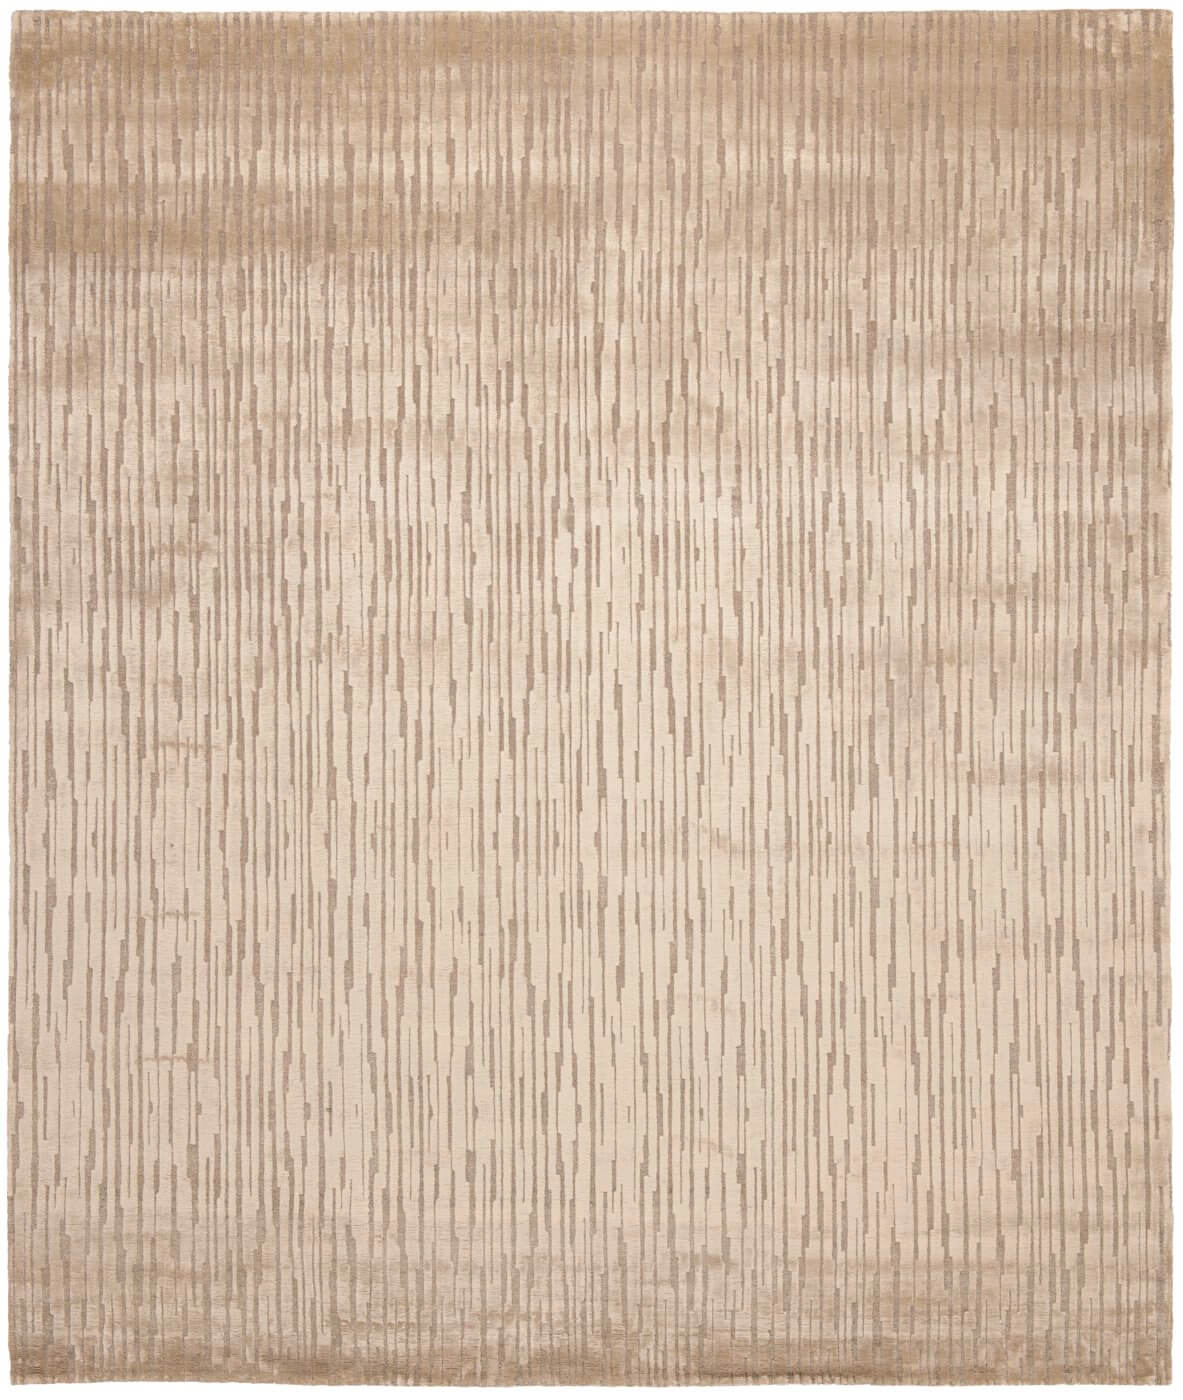 Brown Luxury Hand-woven Rug ☞ Size: 300 x 400 cm